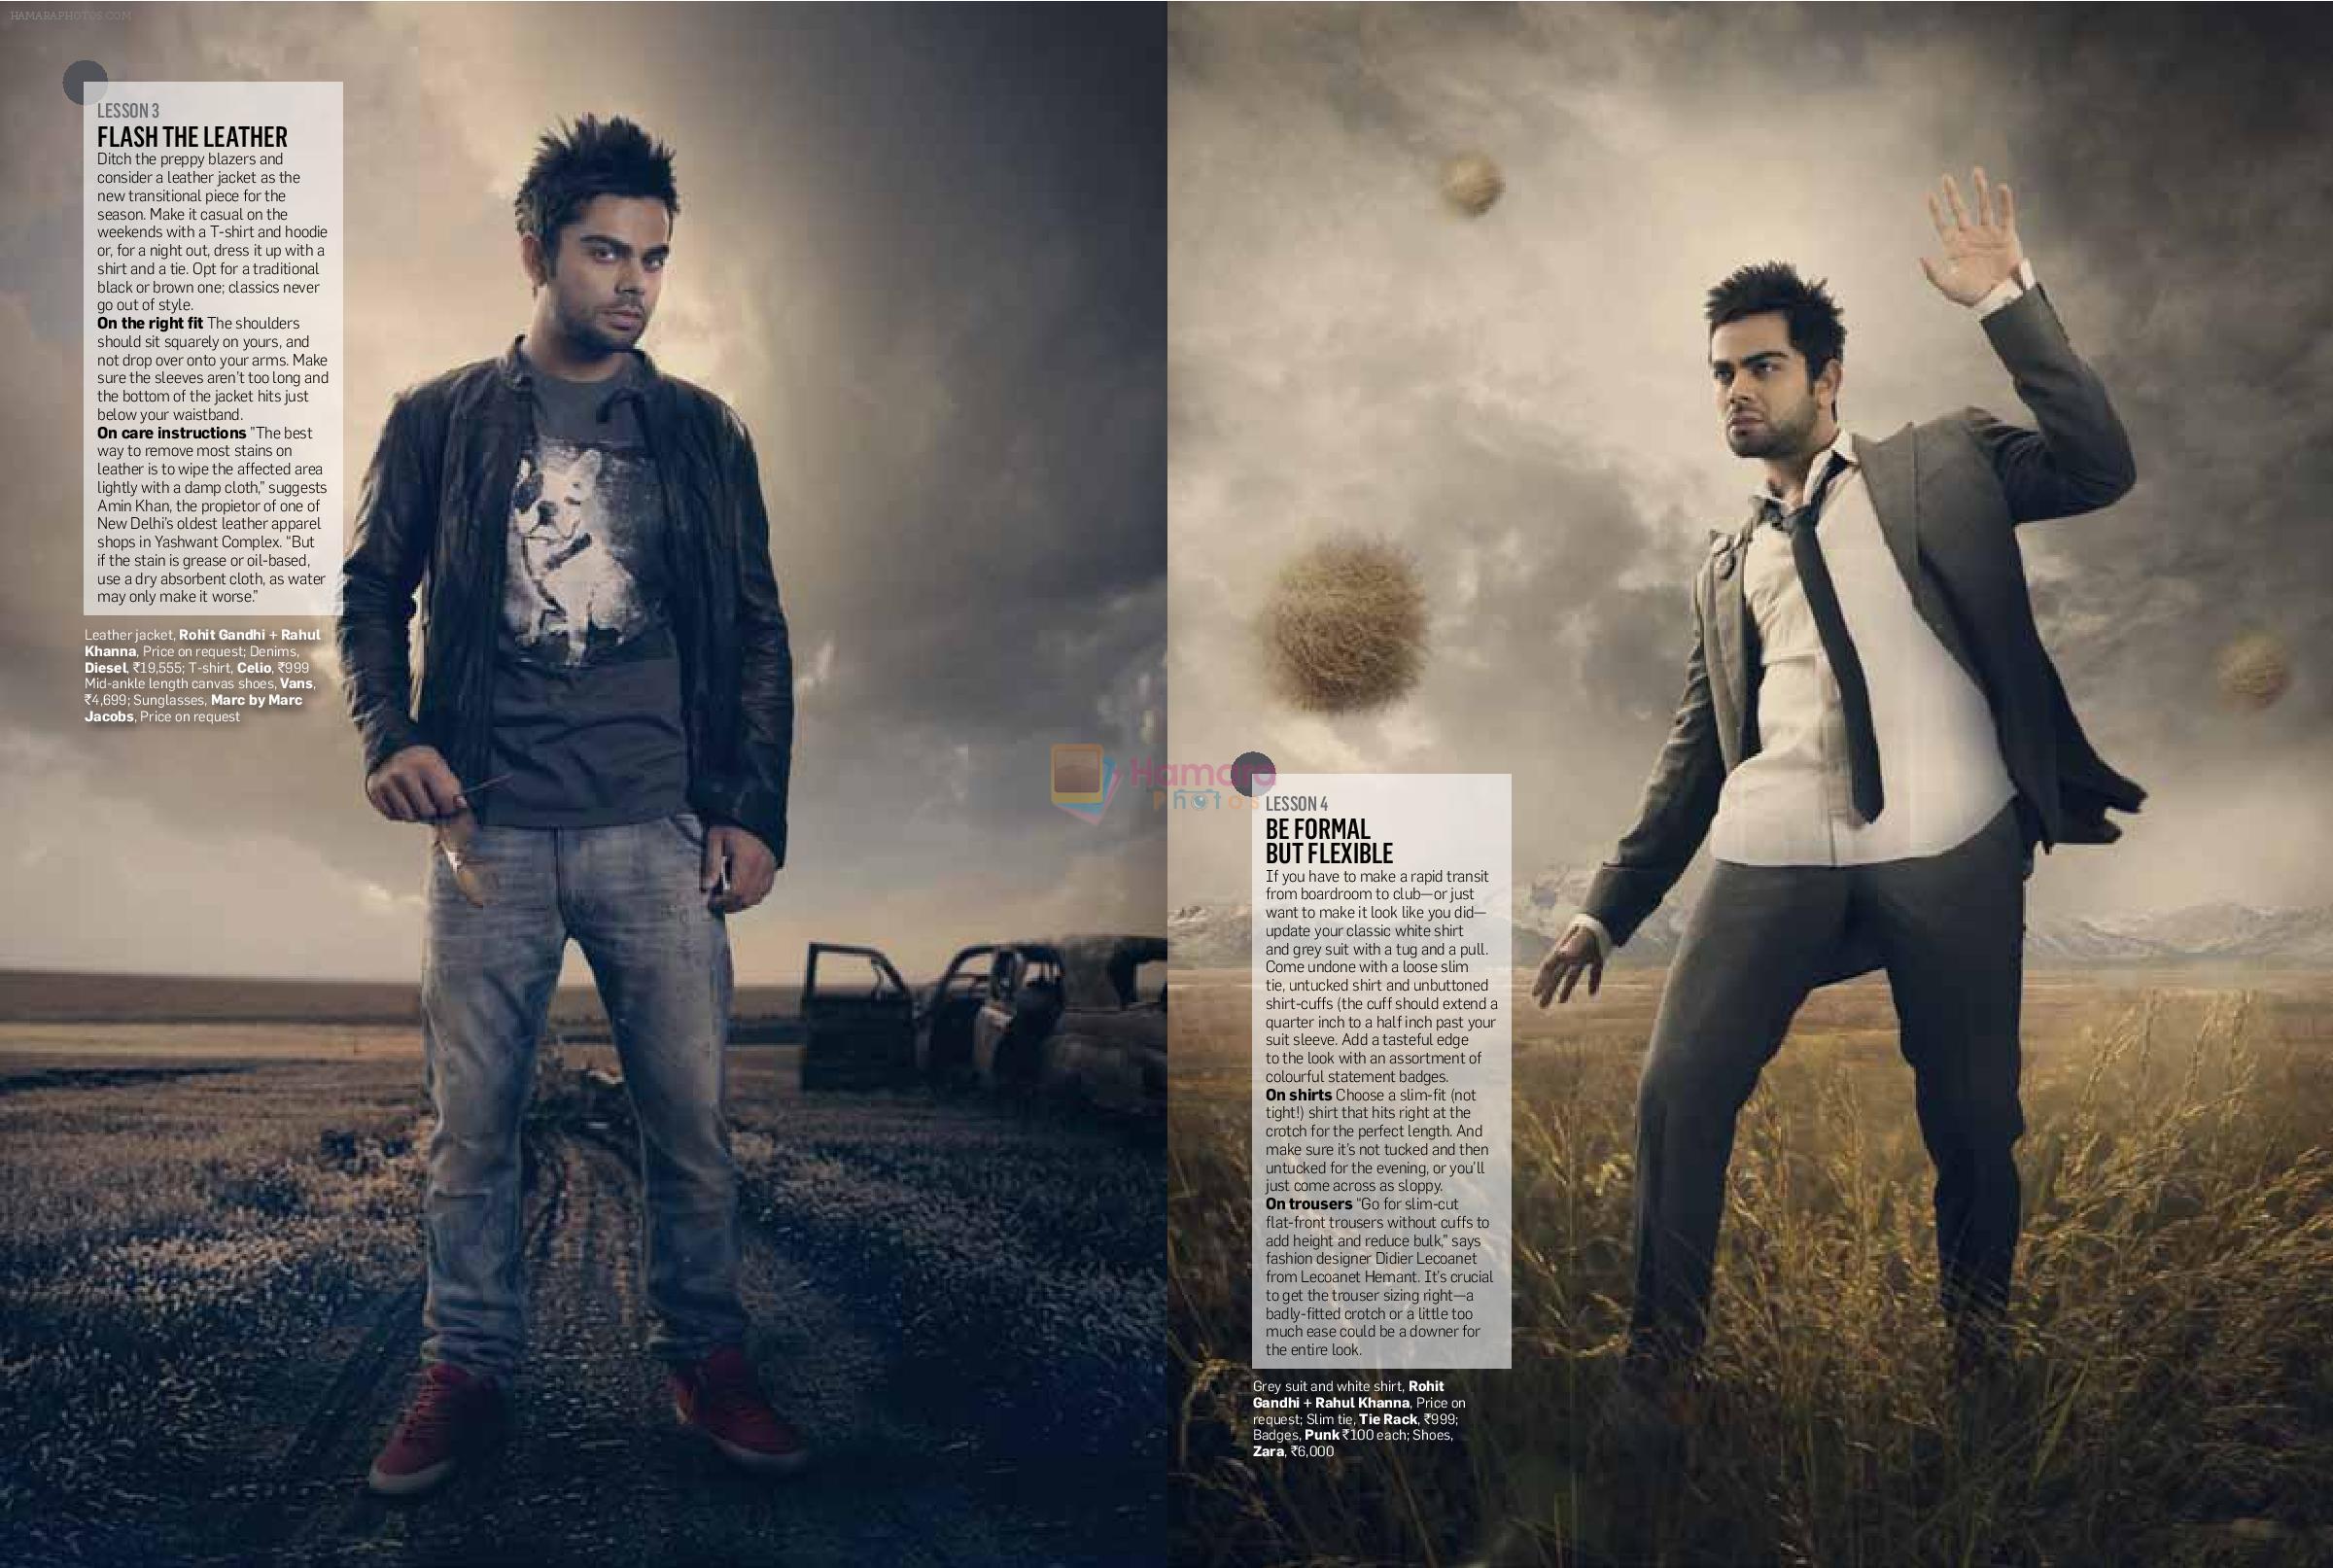 Virat Kohli at Guide to Style with the latest issue of Men's Health magazine (Sept. 2012 issue).